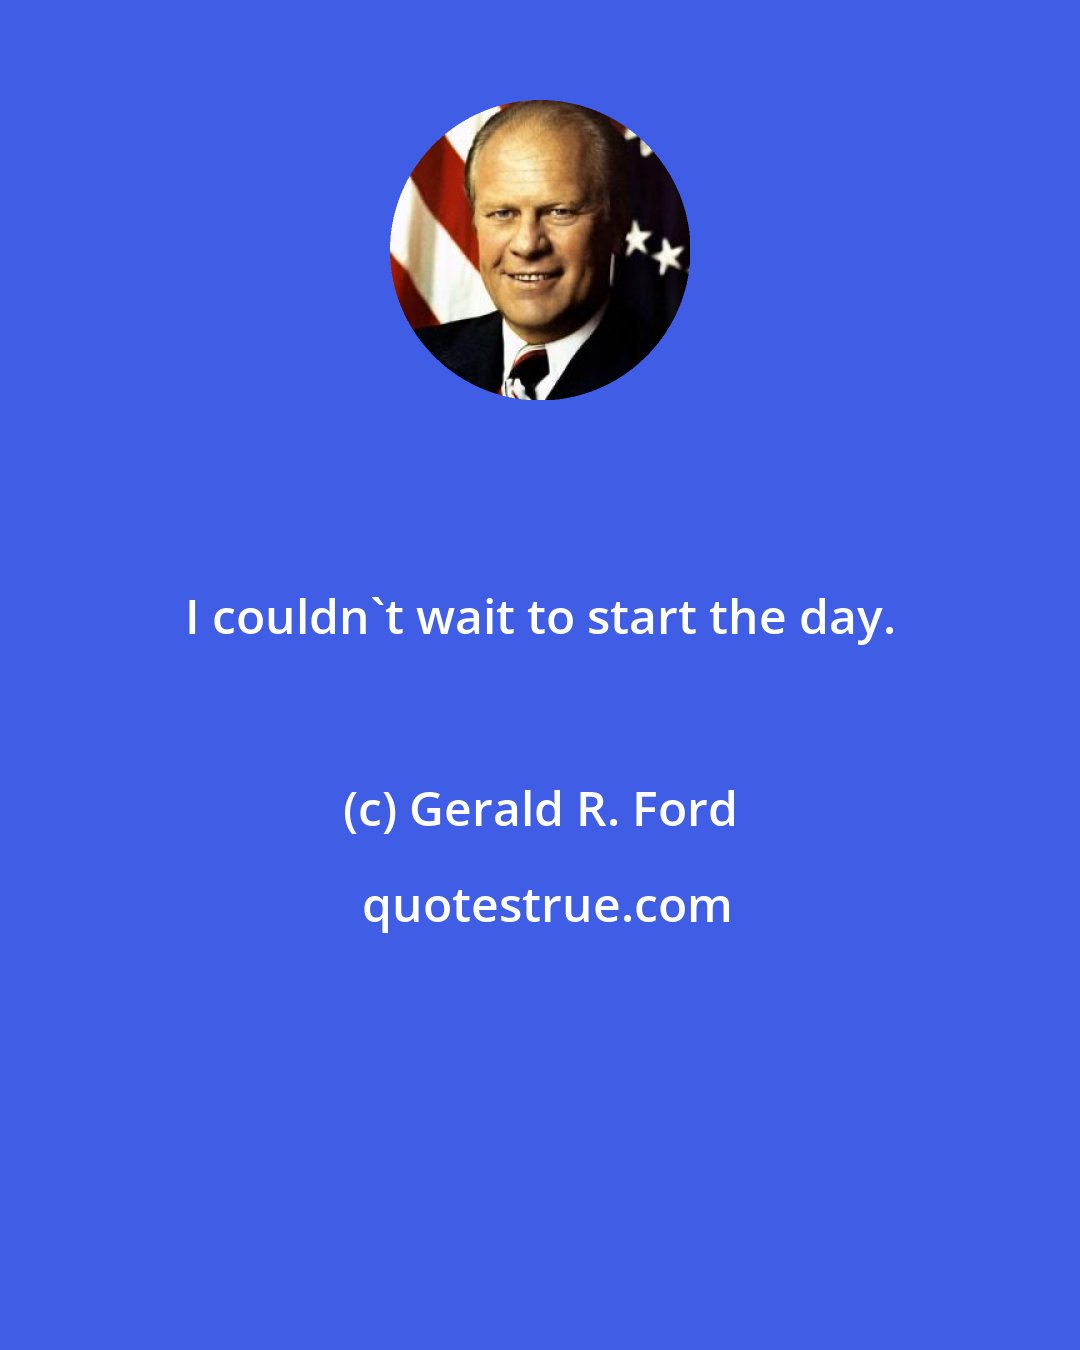 Gerald R. Ford: I couldn't wait to start the day.